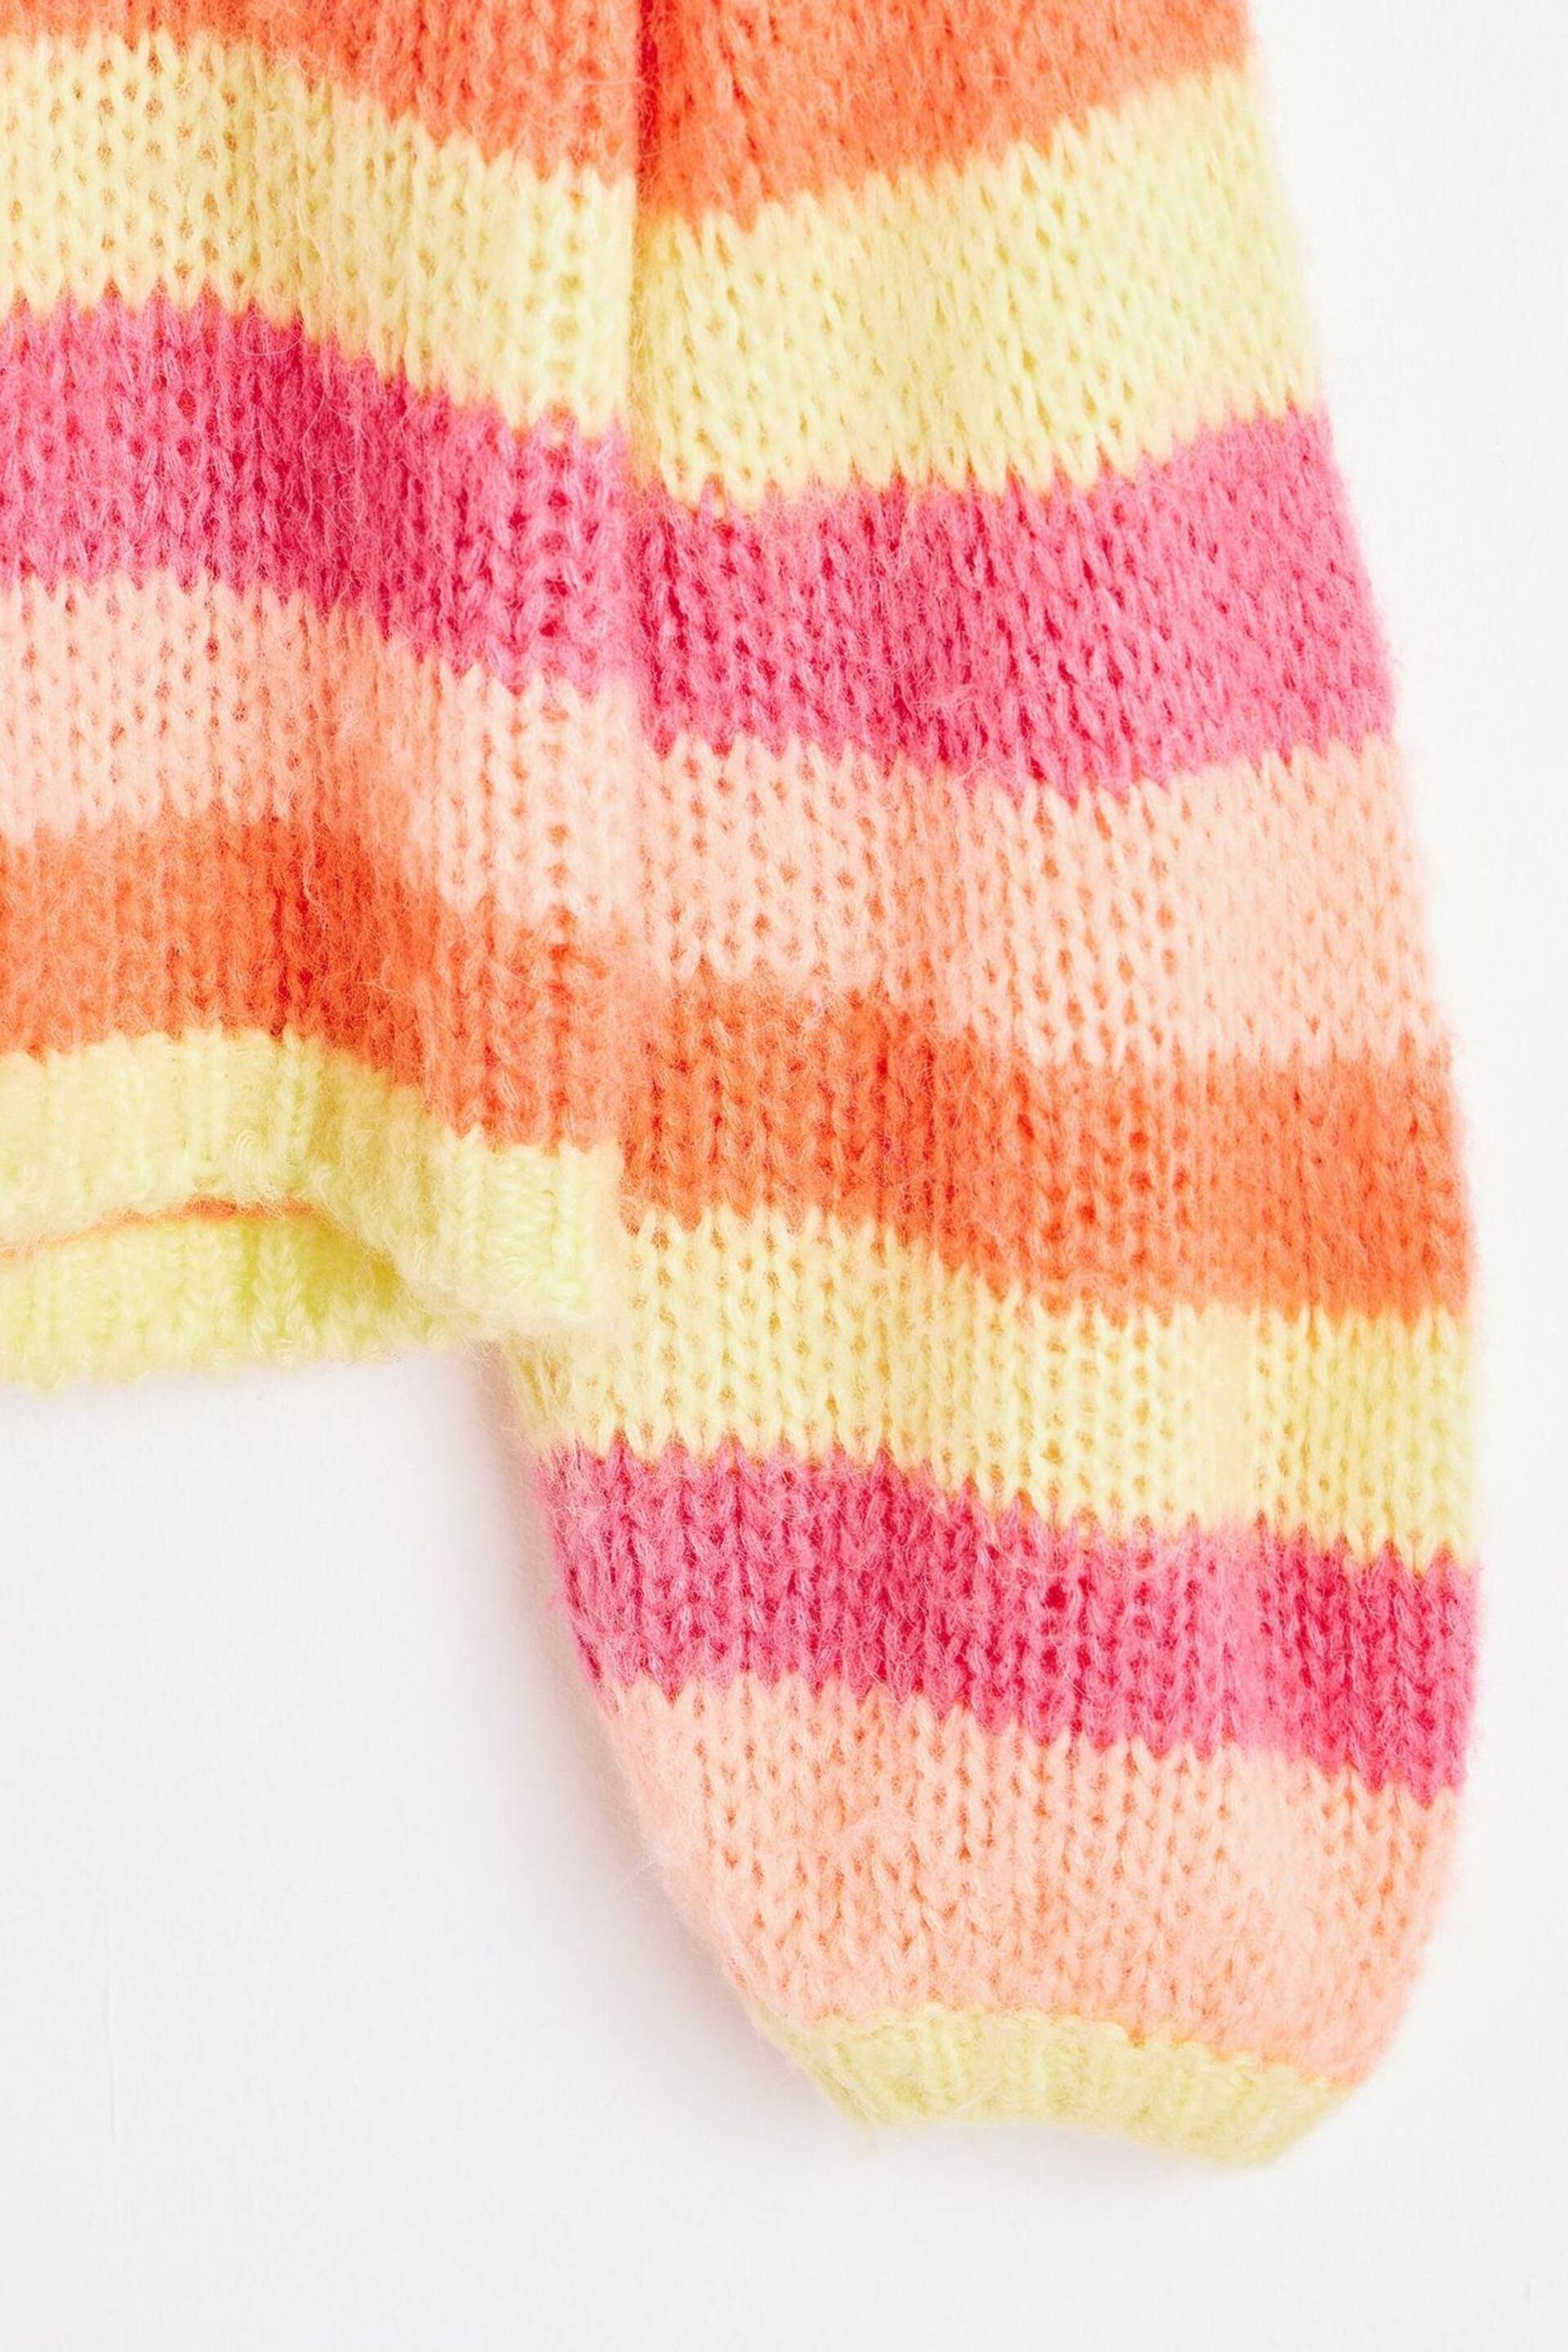 Oliver Bonas Multi Striped Lofty Knitted Jumper - Image 7 of 8